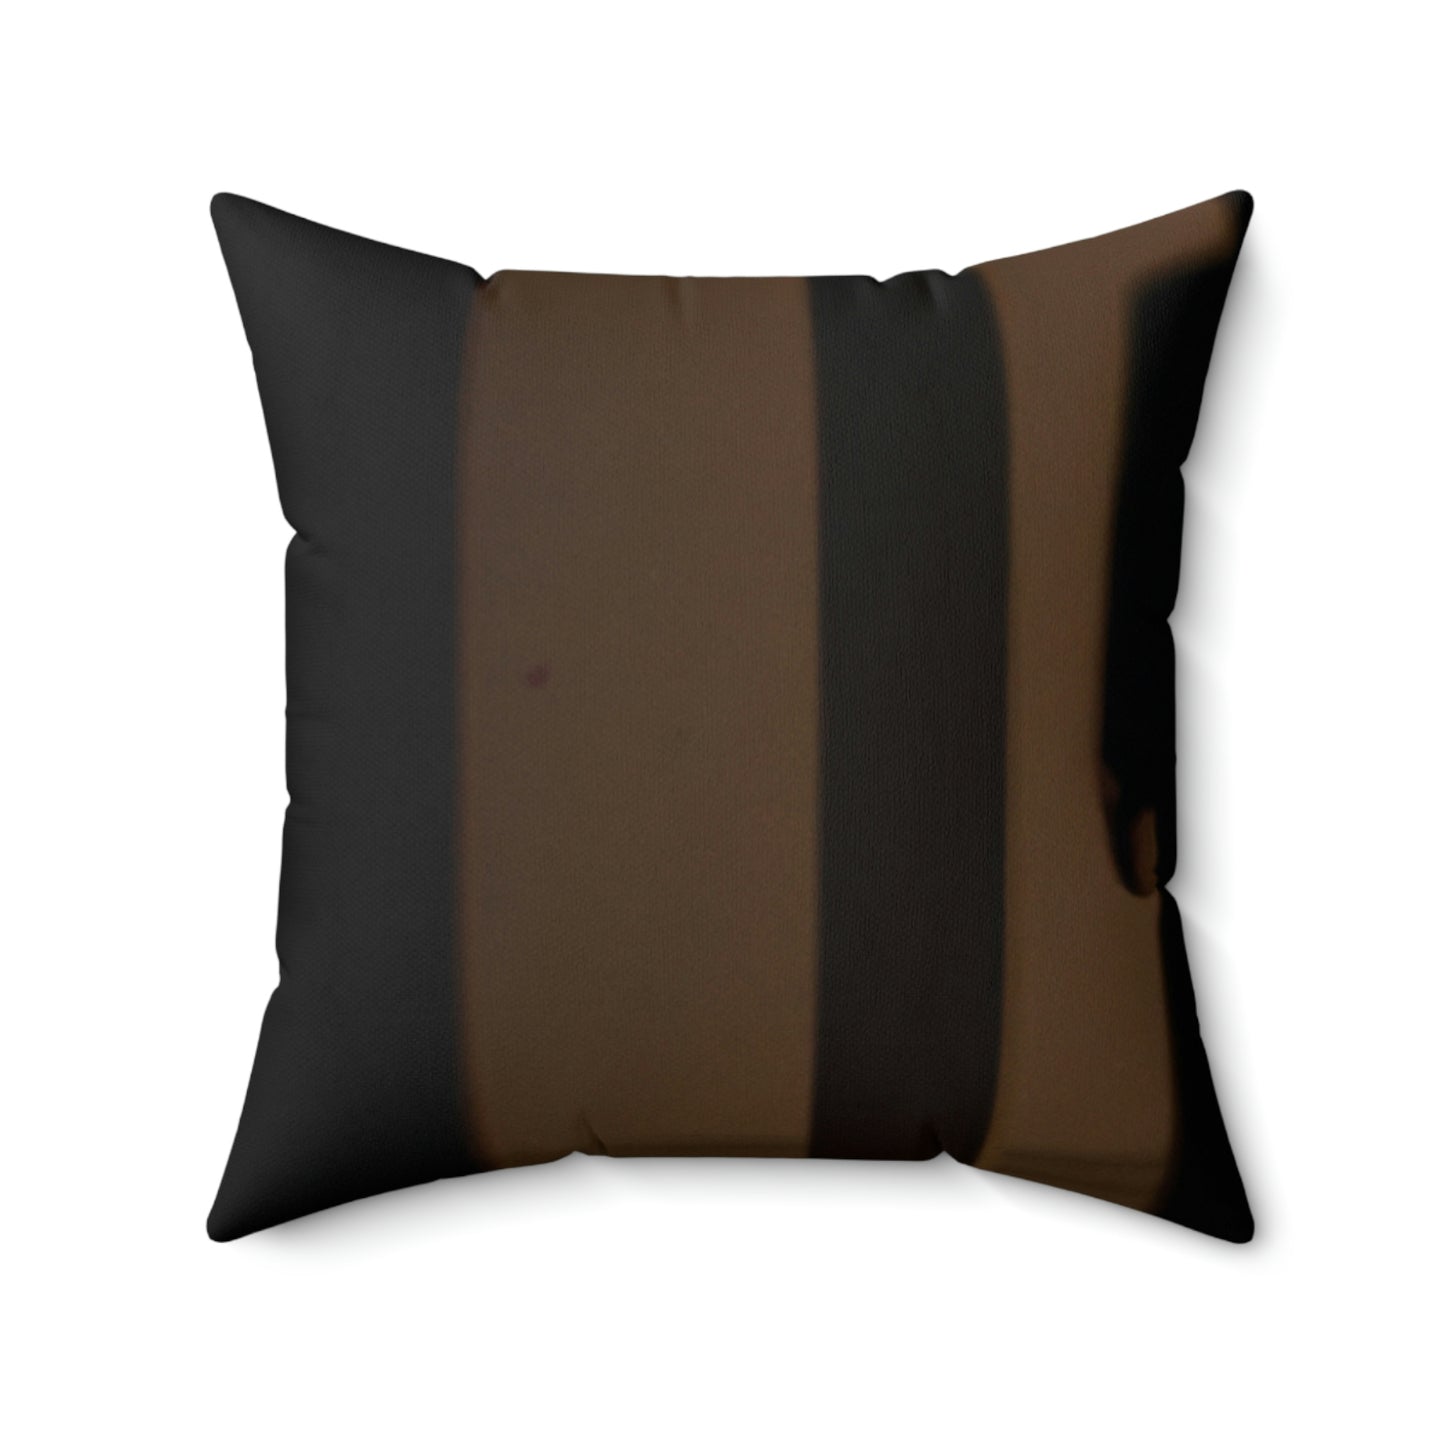 "The Shadow Lurker" - The Alien Square Pillow